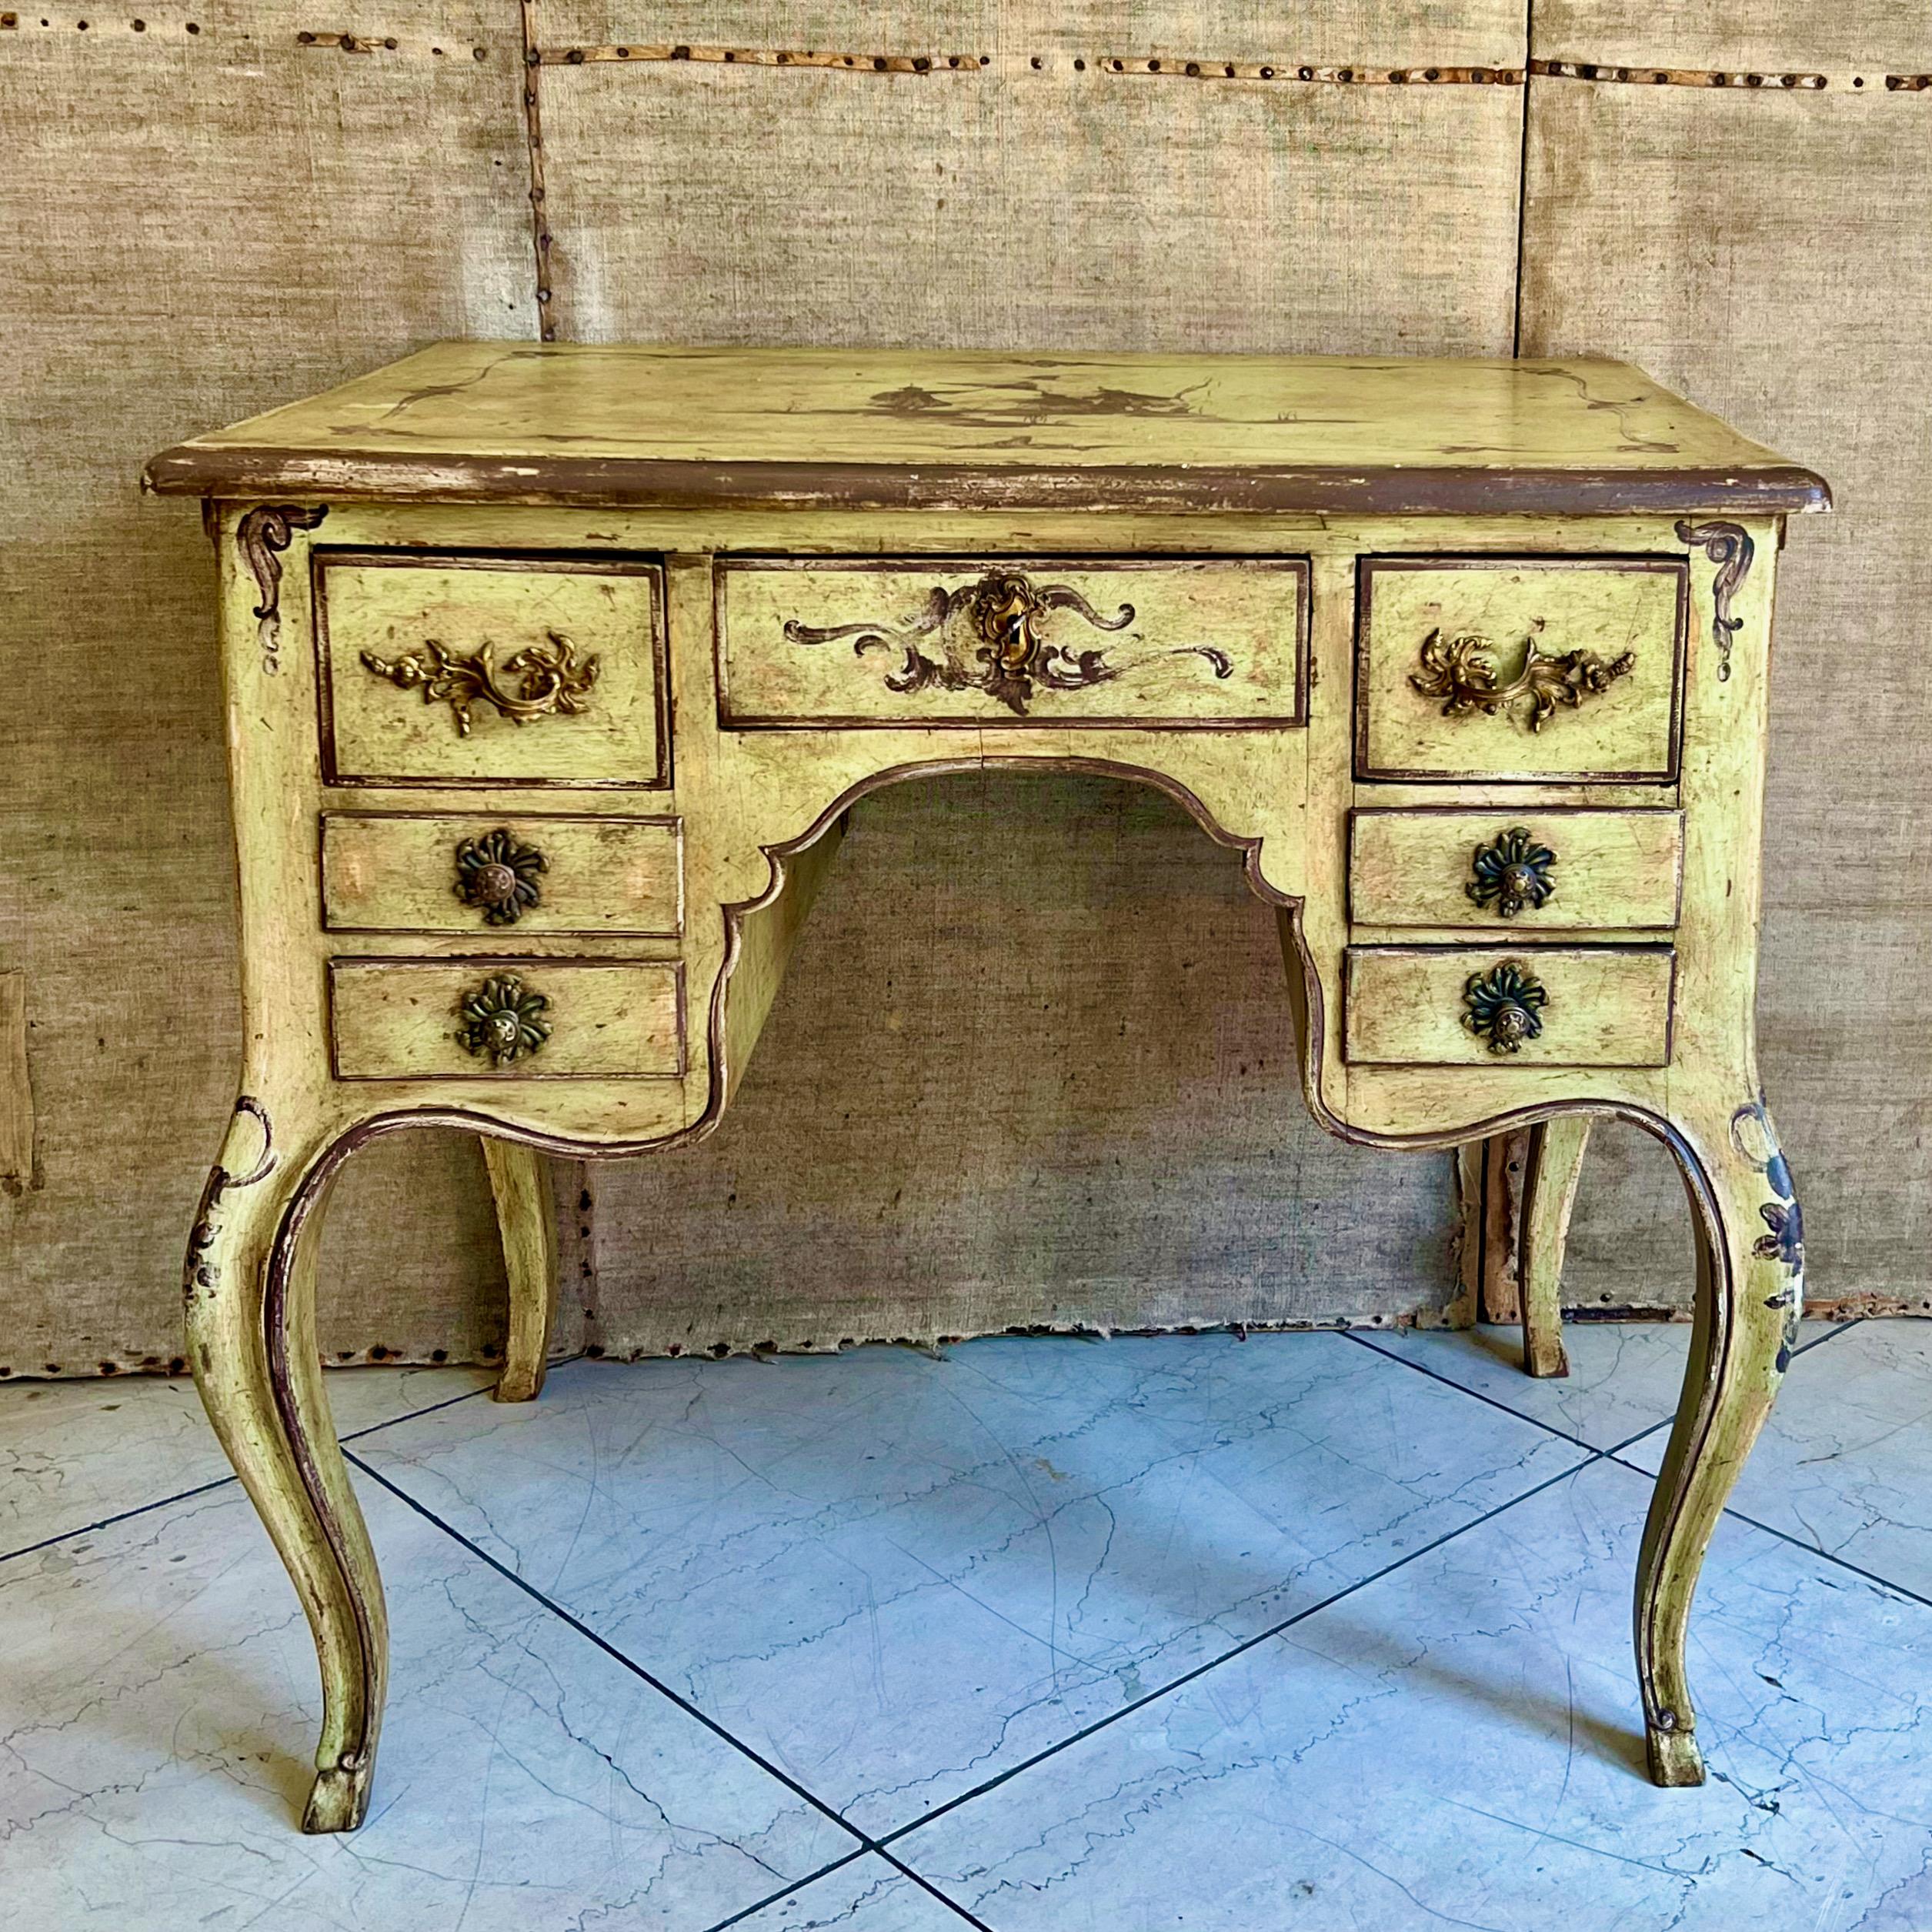 Charming and rare 18th C. Italian painted small ladies desk having deep yellow, maroon and and gold/ochre scrolling foliate in chinoiserie motifs with similar painted detail to both sides, raised on delicate slender cabriole legs. Original condition